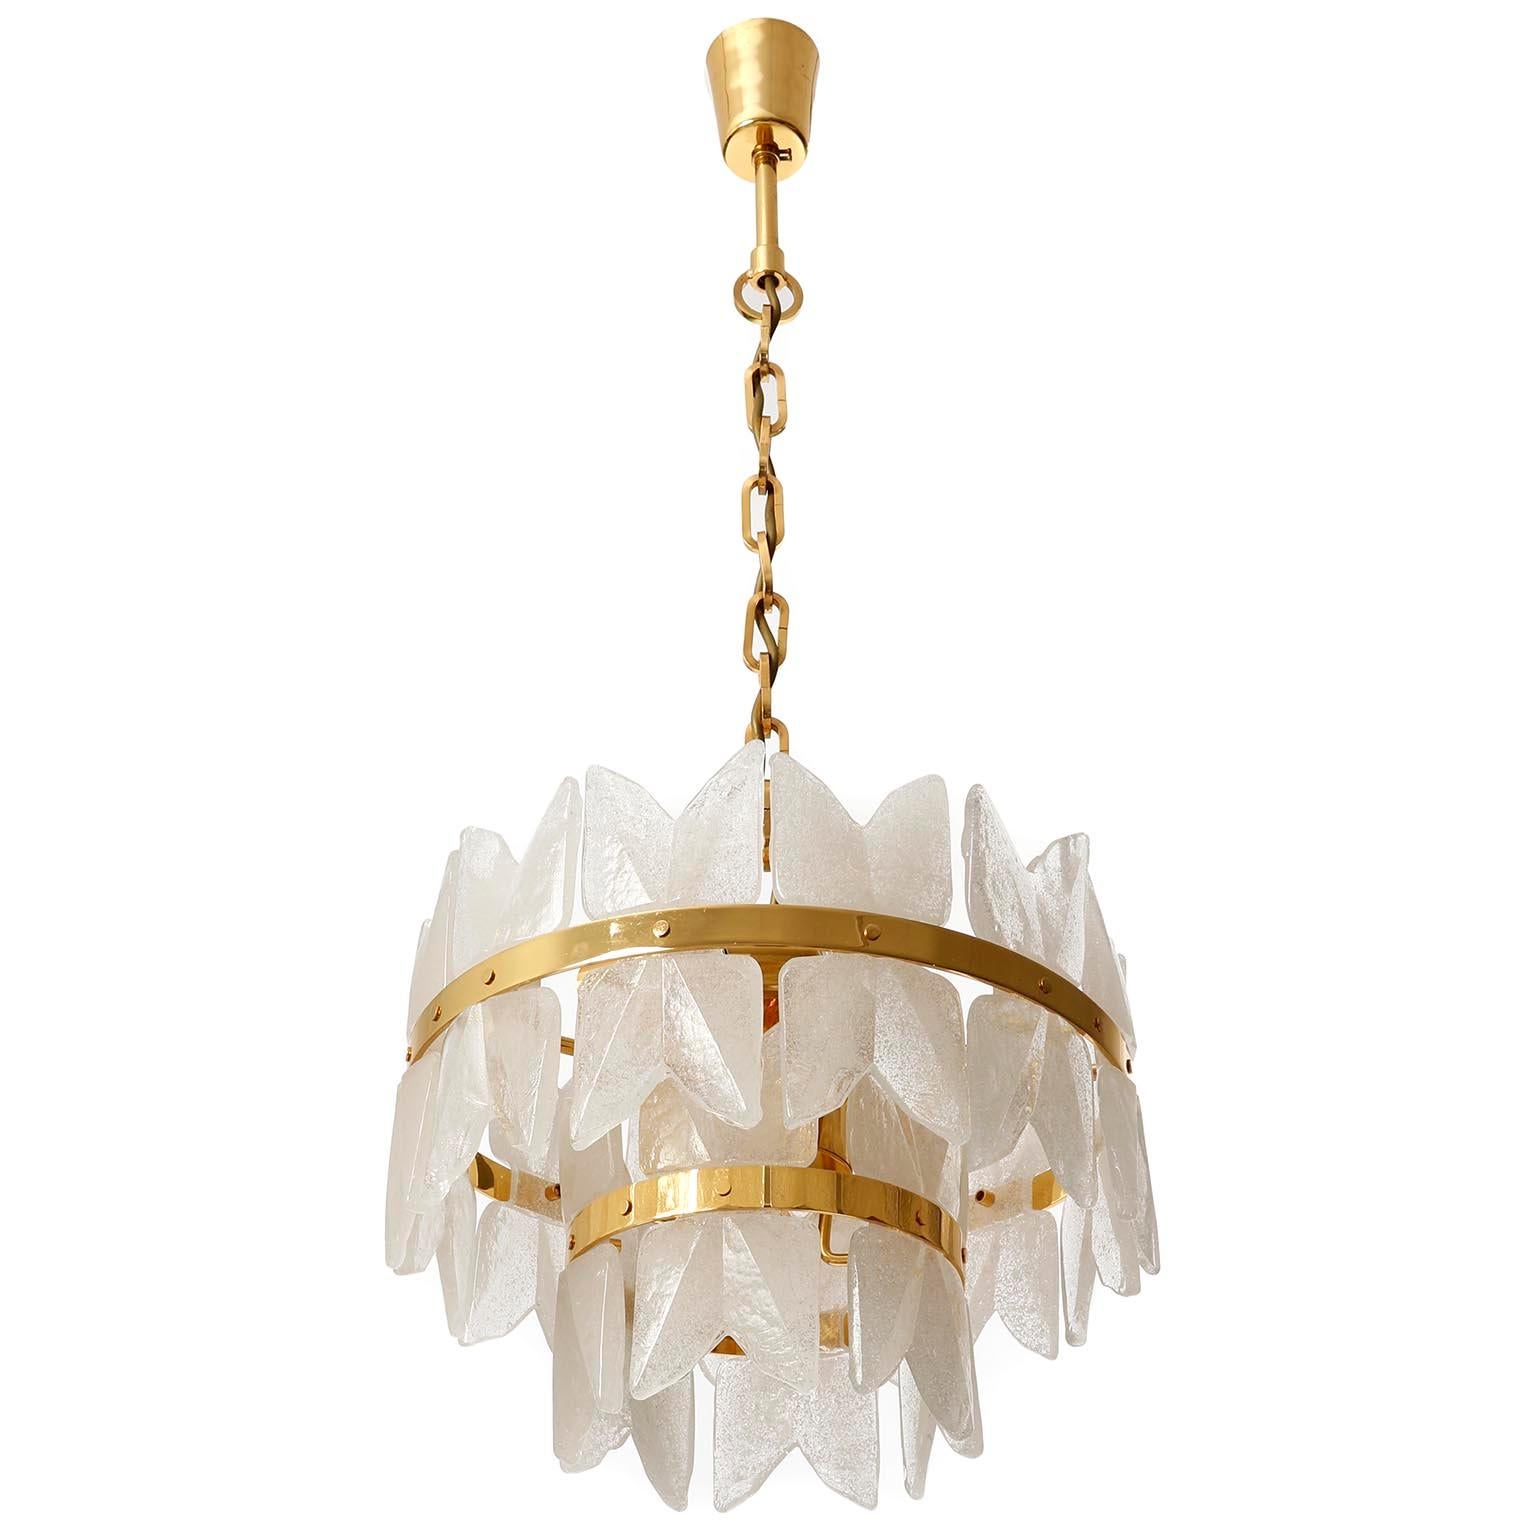 A very exclusive Hollywood regency ice glass chandelier or pendant light model 'Corina' no. 3970 by J.T. Kalmar, Vienna, Austria, manufactured in midcentury, circa 1970 (late 1960s or early 1970s).
A high quality piece which is made of a 24-carat